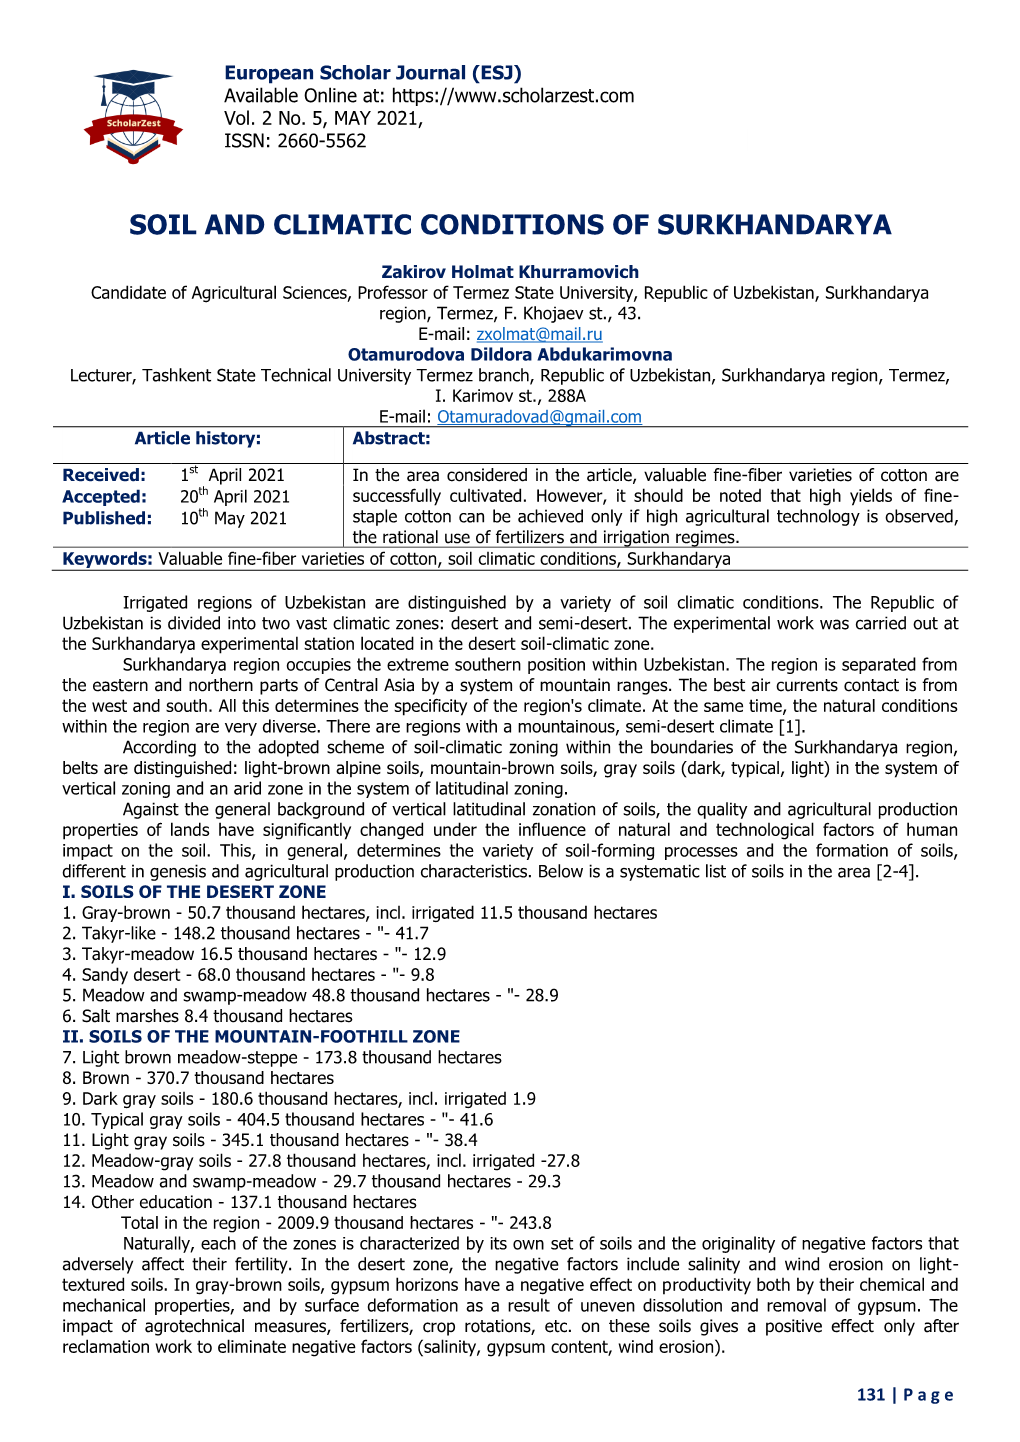 Soil and Climatic Conditions of Surkhandarya